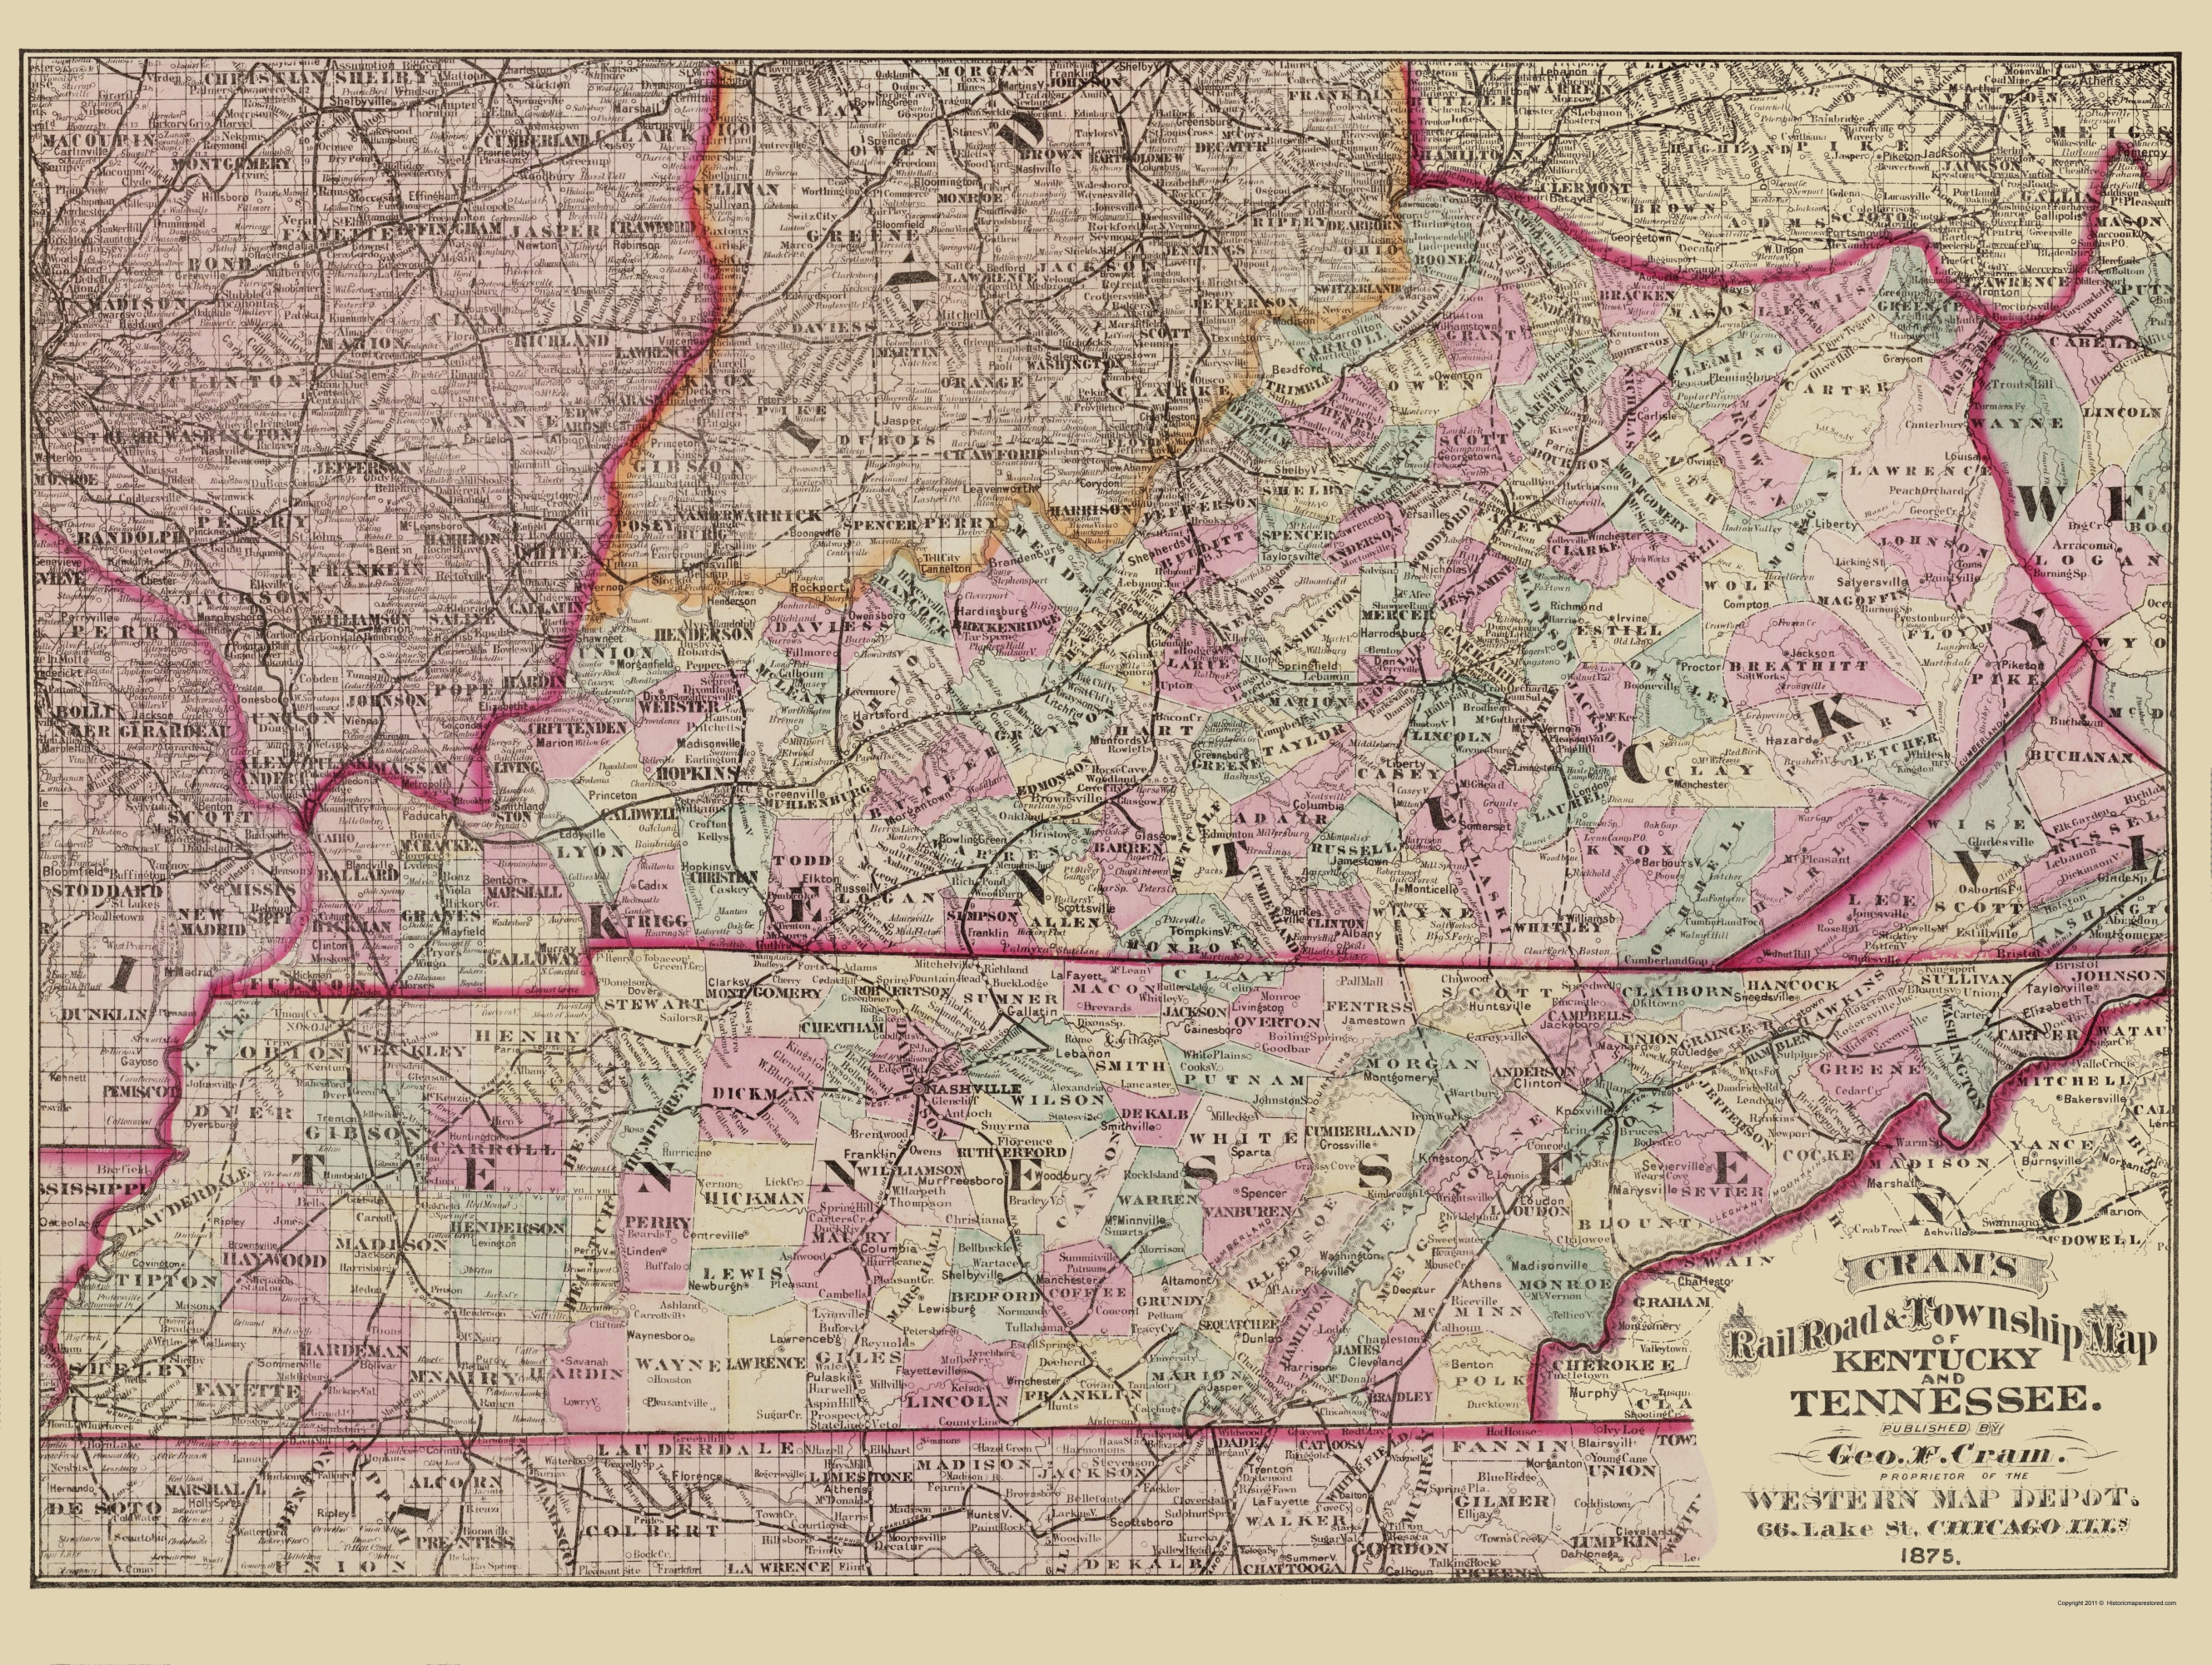 Railroad and county map of TN c1888 repro 56x24 